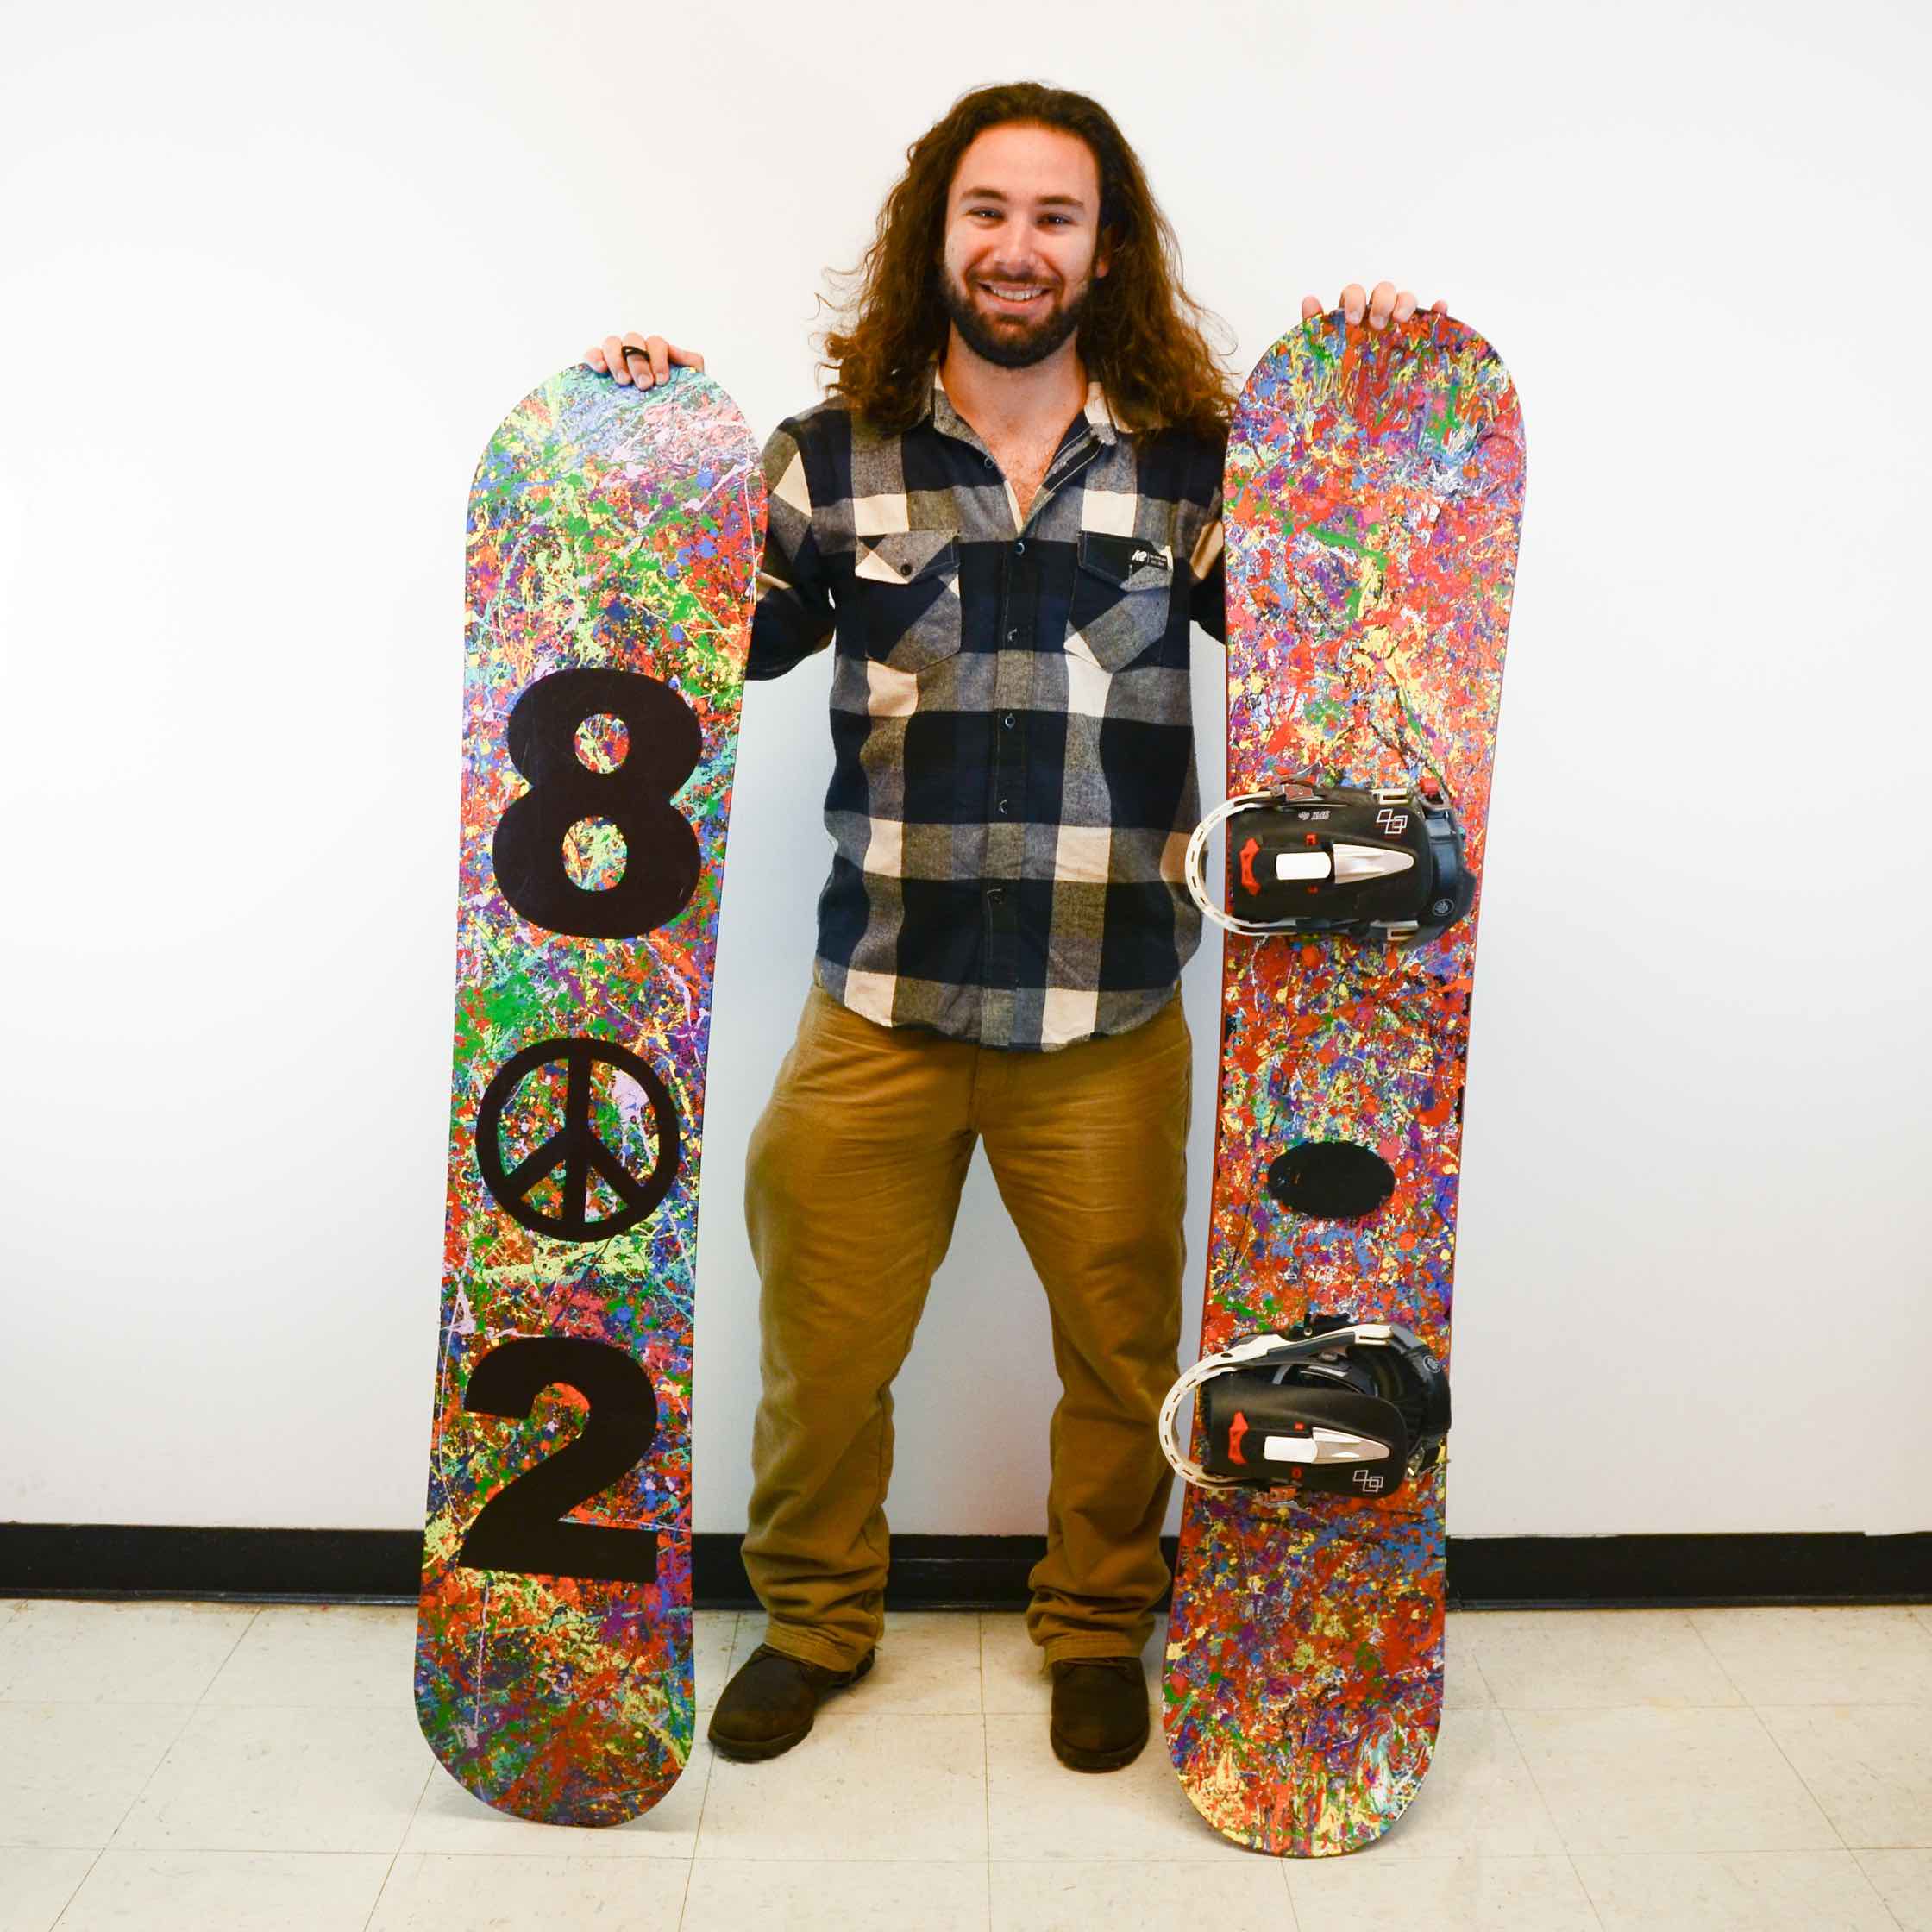 Member Projects: Even Greenwald’s Painted Snowboards and Skis